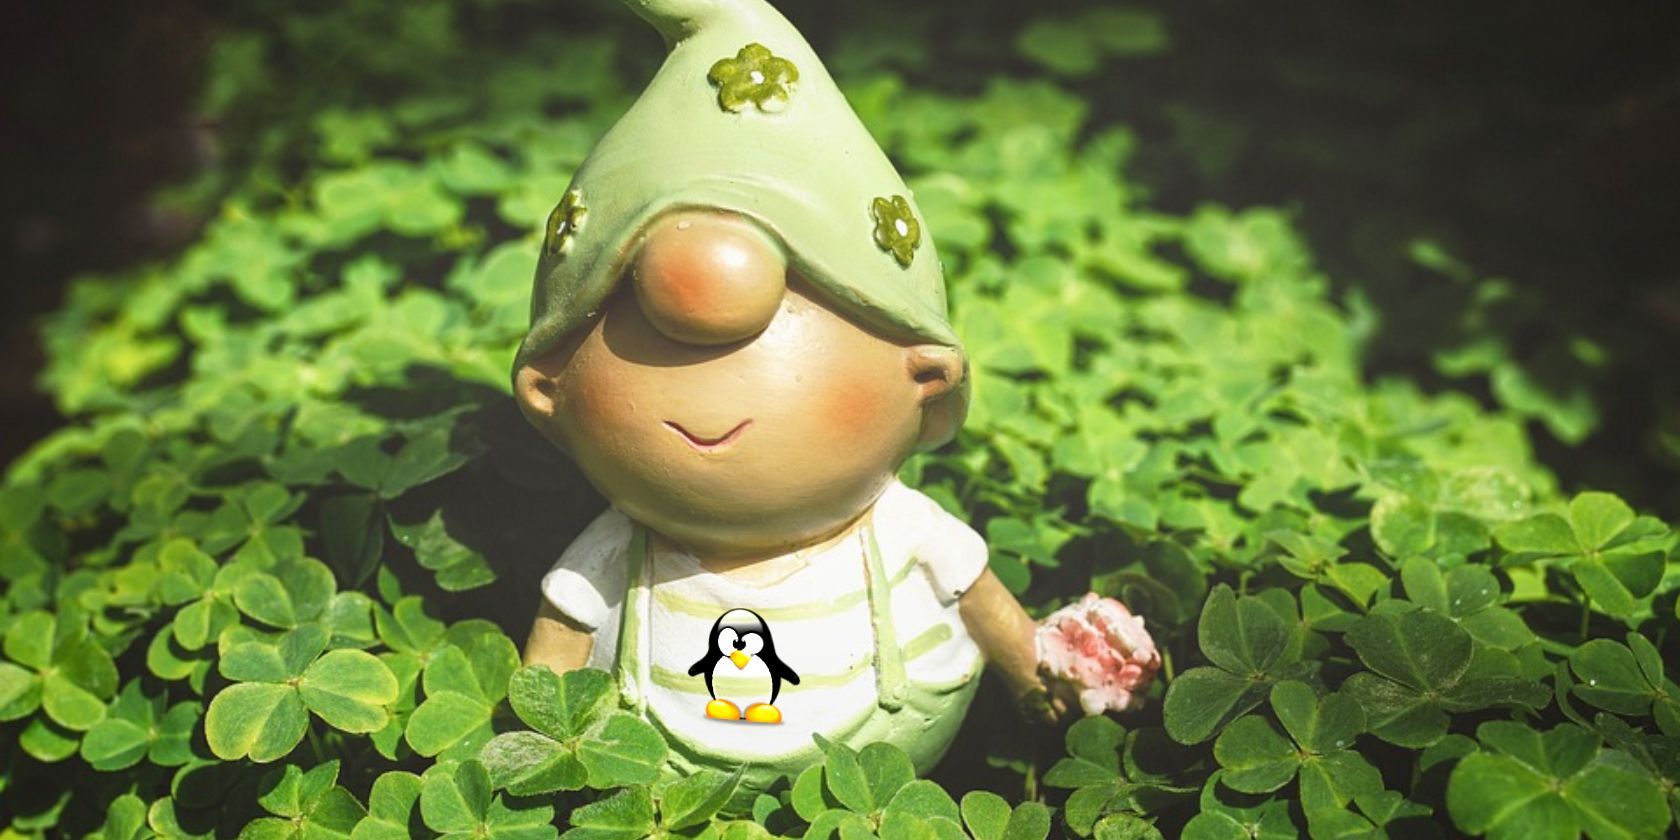 a gnome with the linux tux logo on his shirt